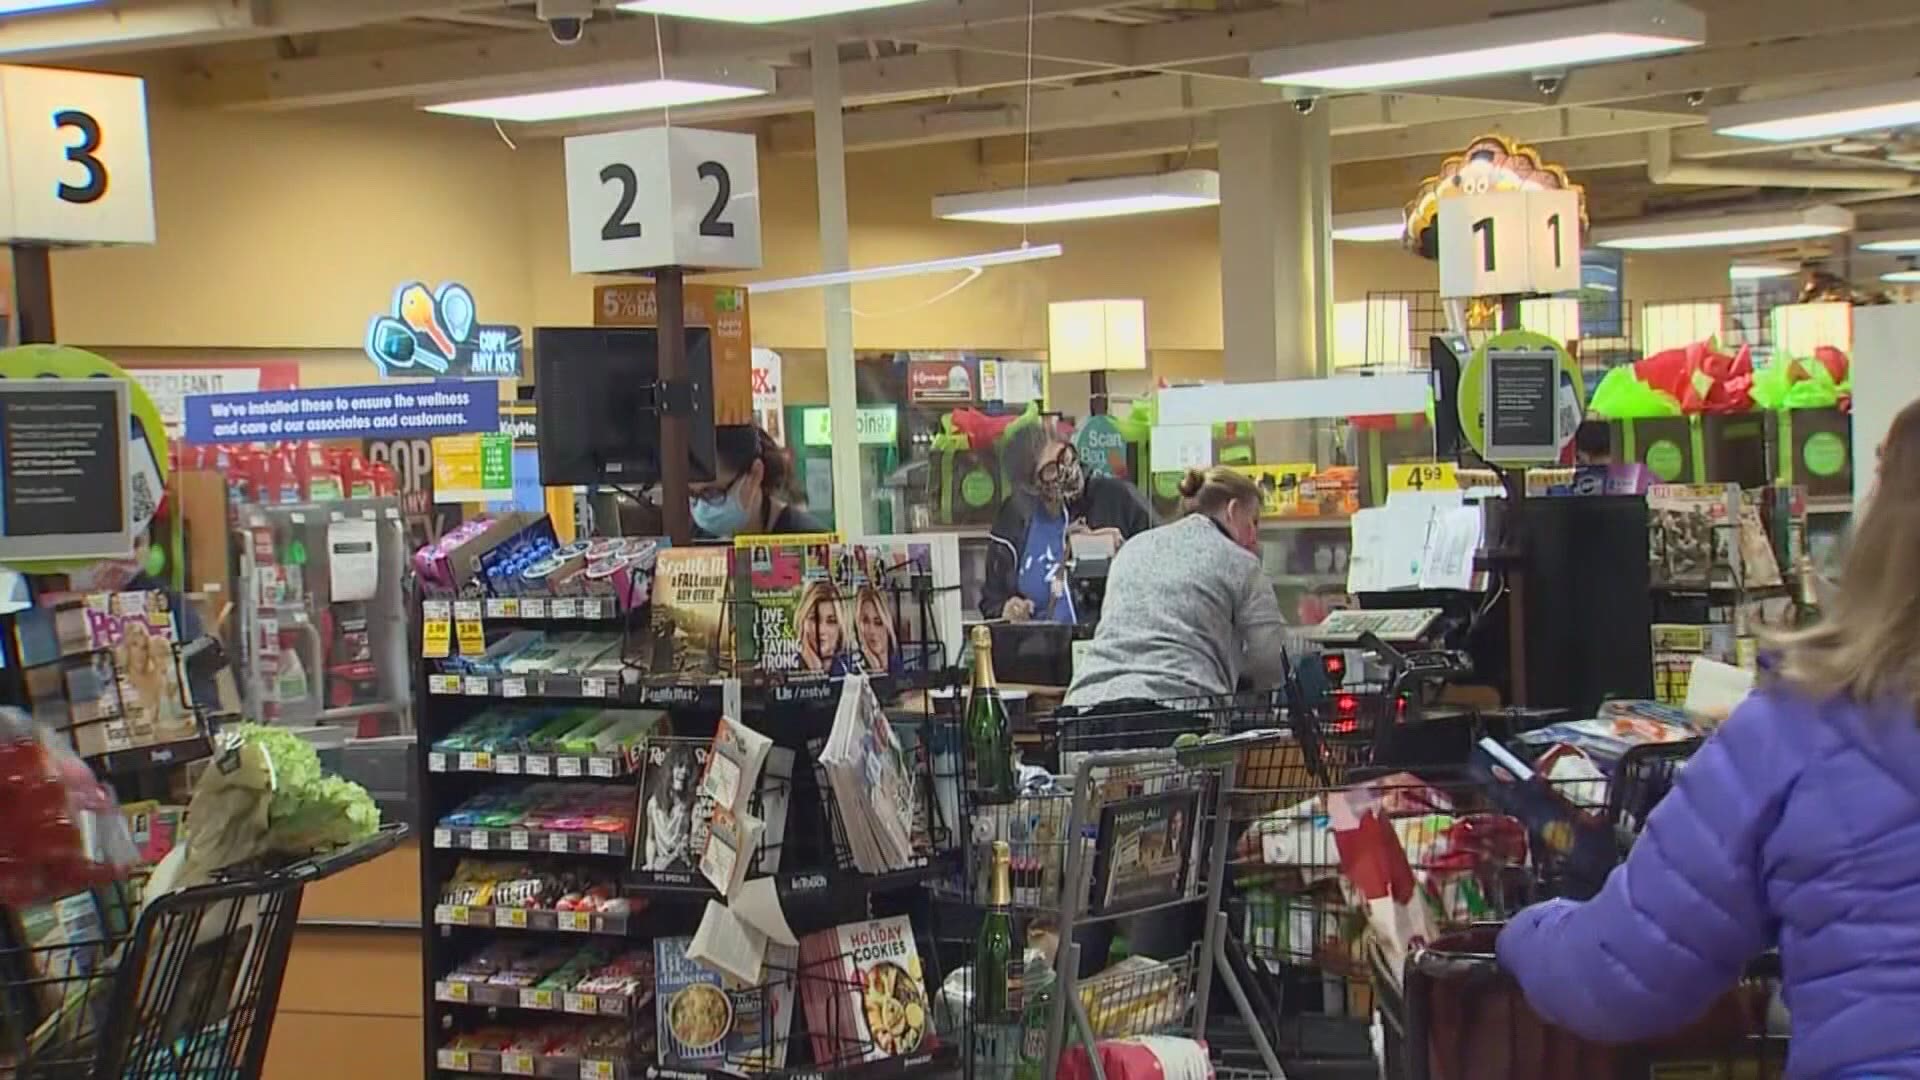 The County Council is holding a public hearing on Wednesday morning as it considers an ordinance to give grocery workers an hourly $4 hazard pay increase.